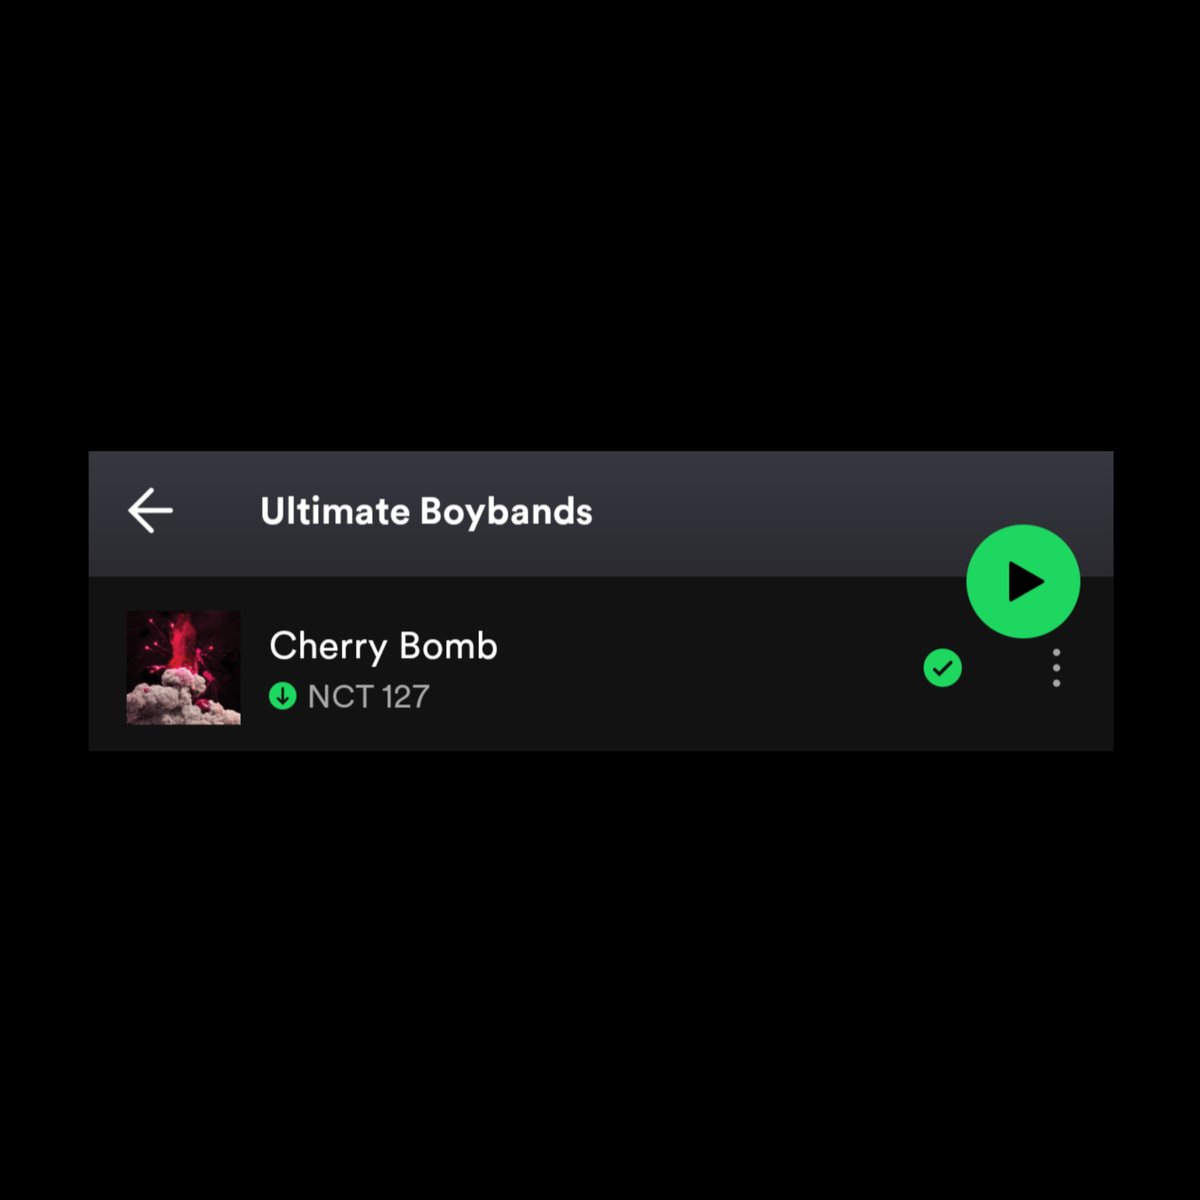 240429 [INFO] #NCT127's 'Cherry Bomb' was added to the 'Ultimate Boybands' playlist on Spotify!

Stream here: 
🔗l1nk.dev/w12u2

@NCTsmtown_127